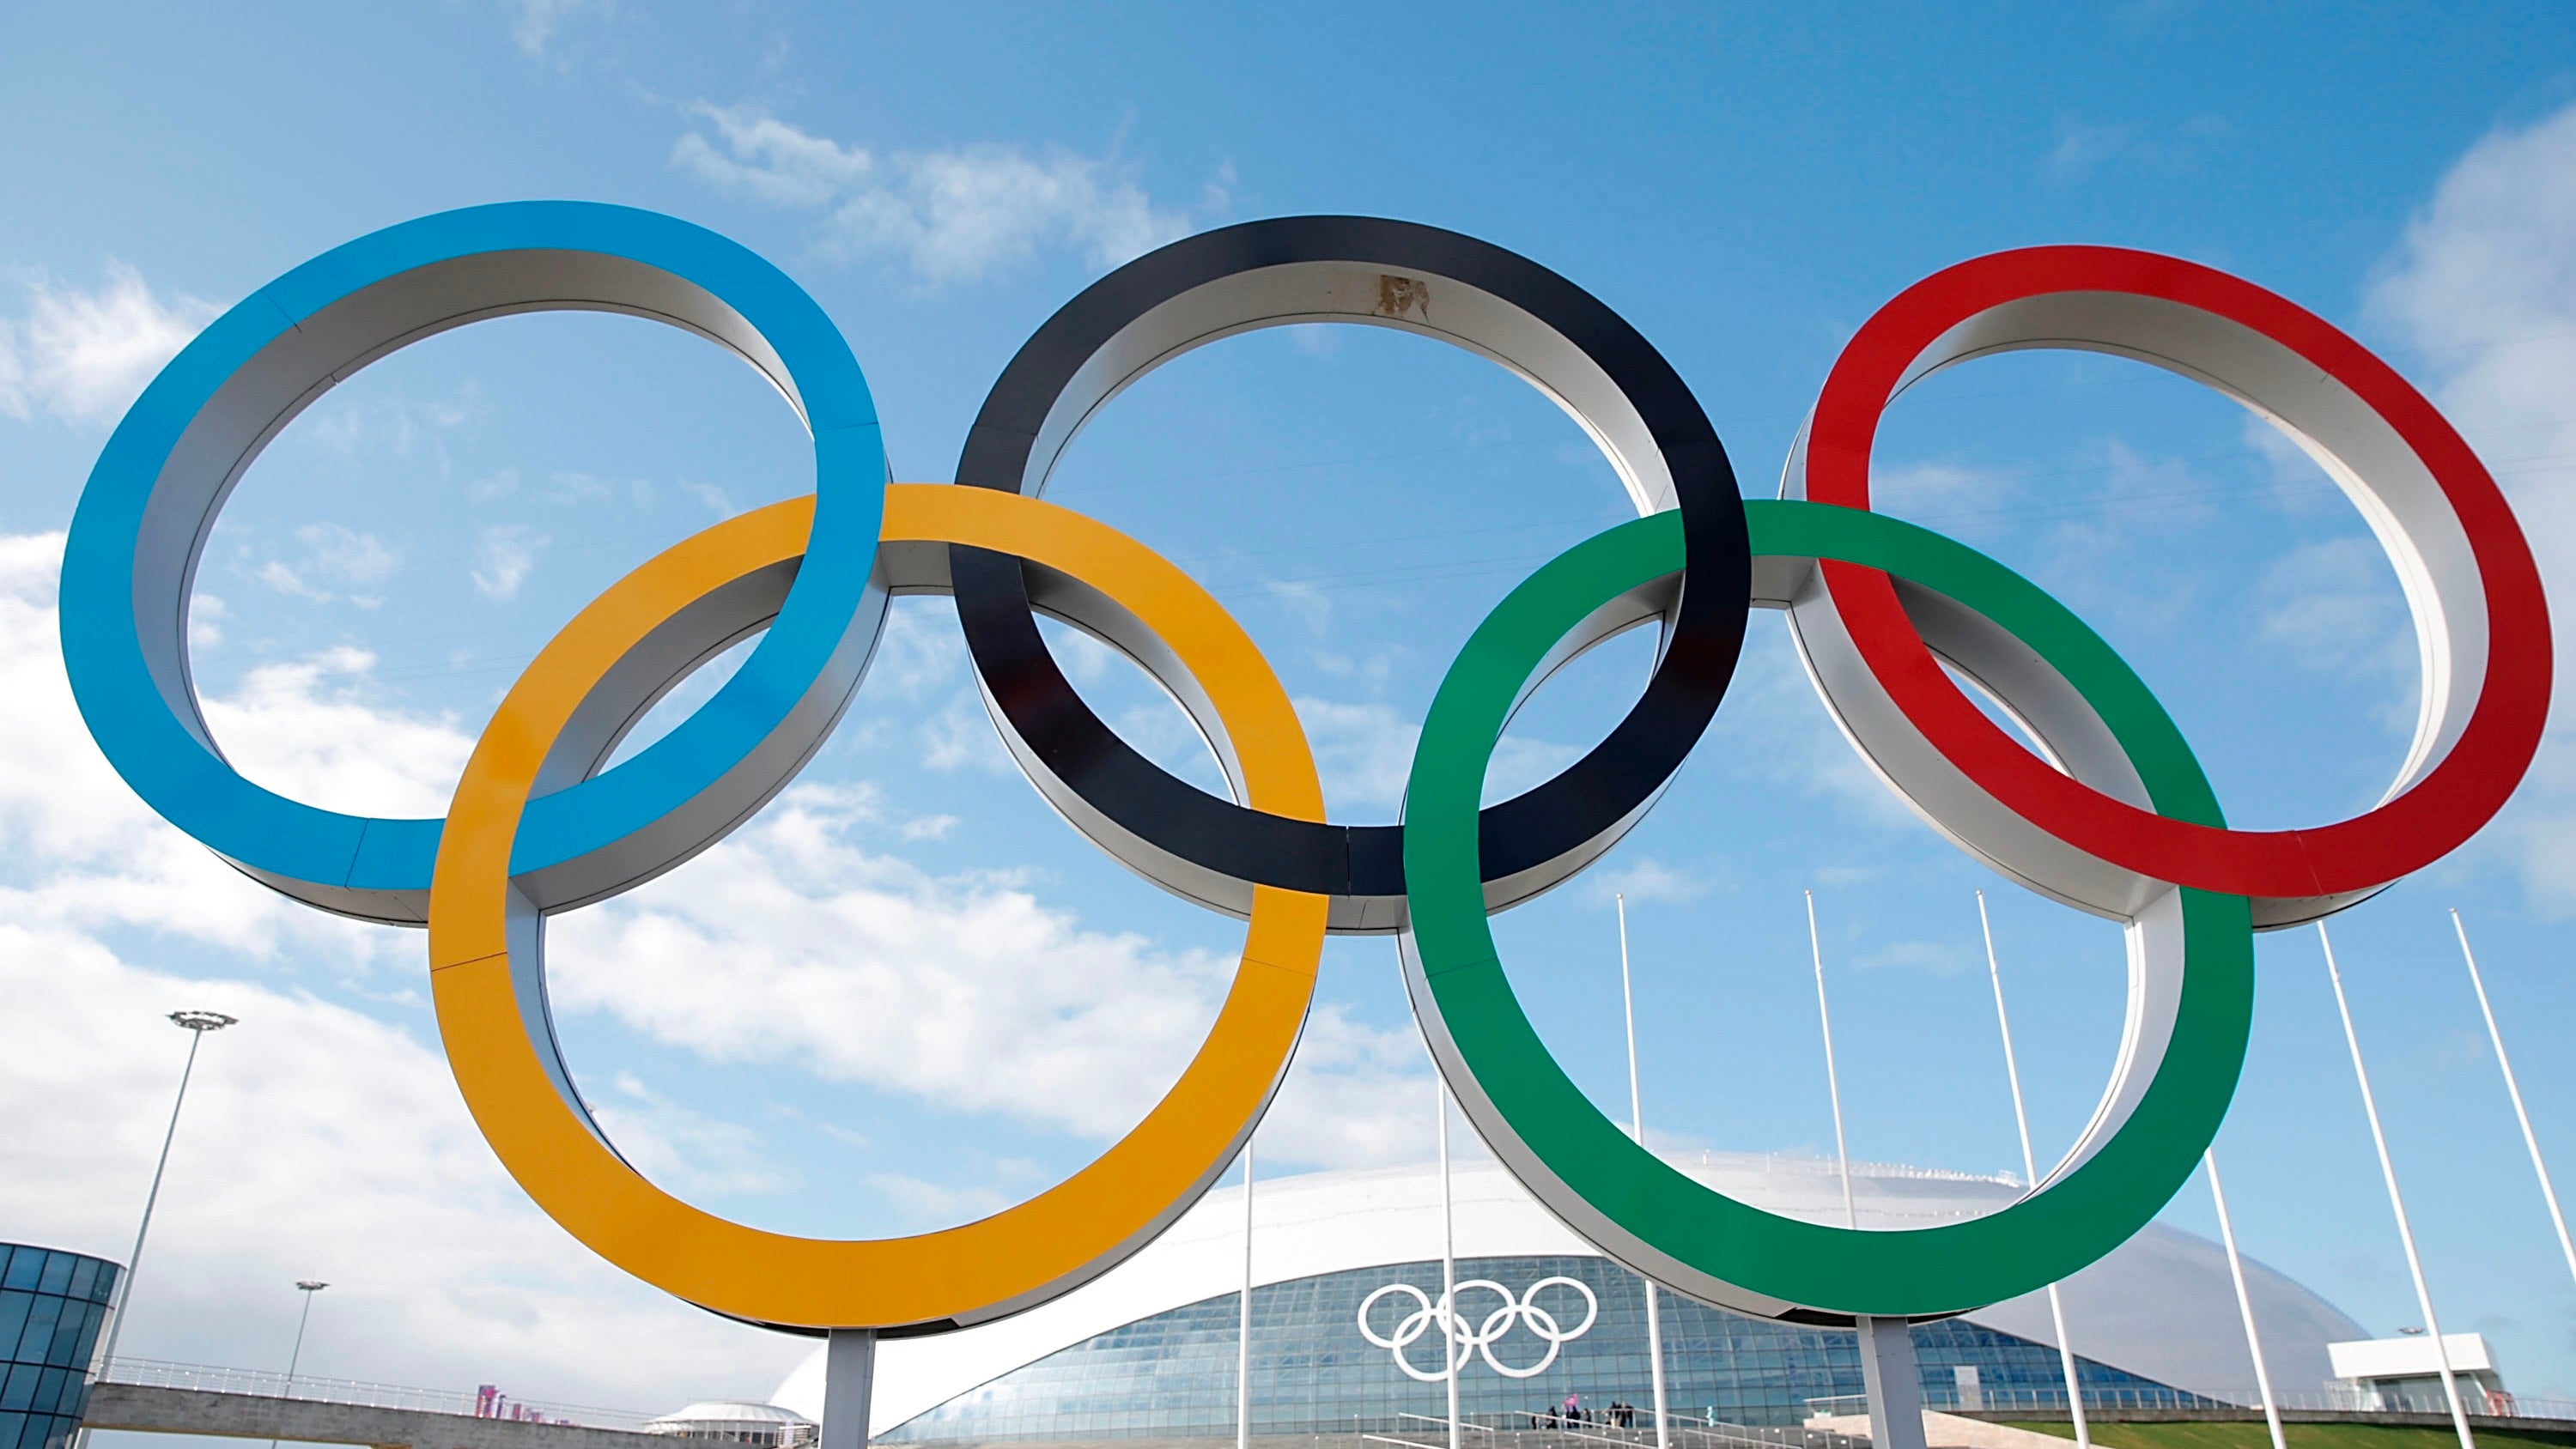 16 Facts About Olympic Games - Facts.net